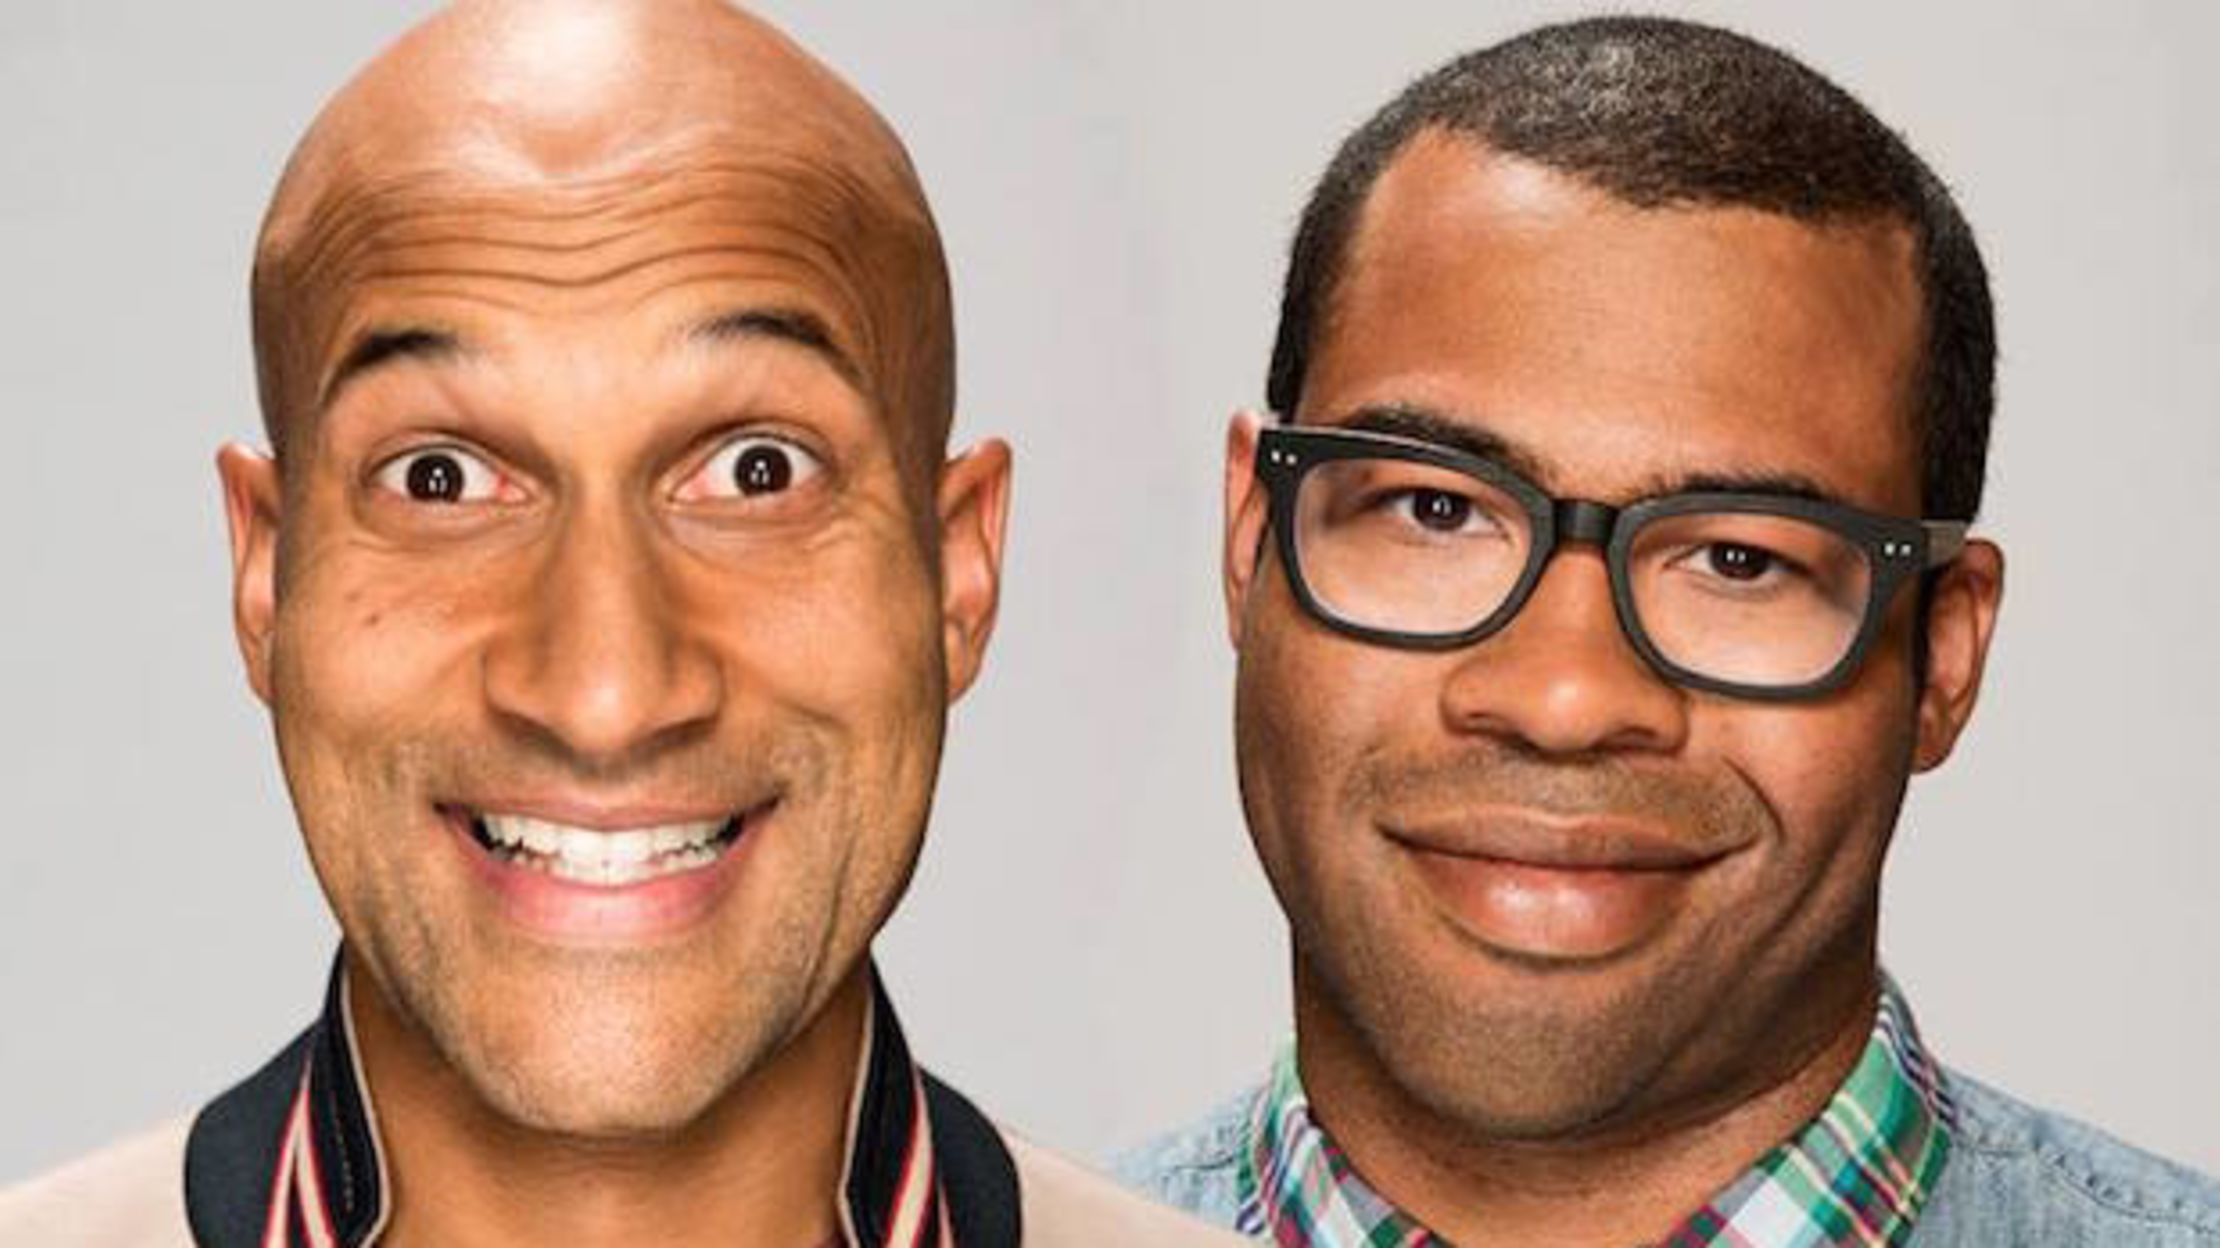 14 Dead Serious Facts About ‘Key & Peele’ Mental Floss